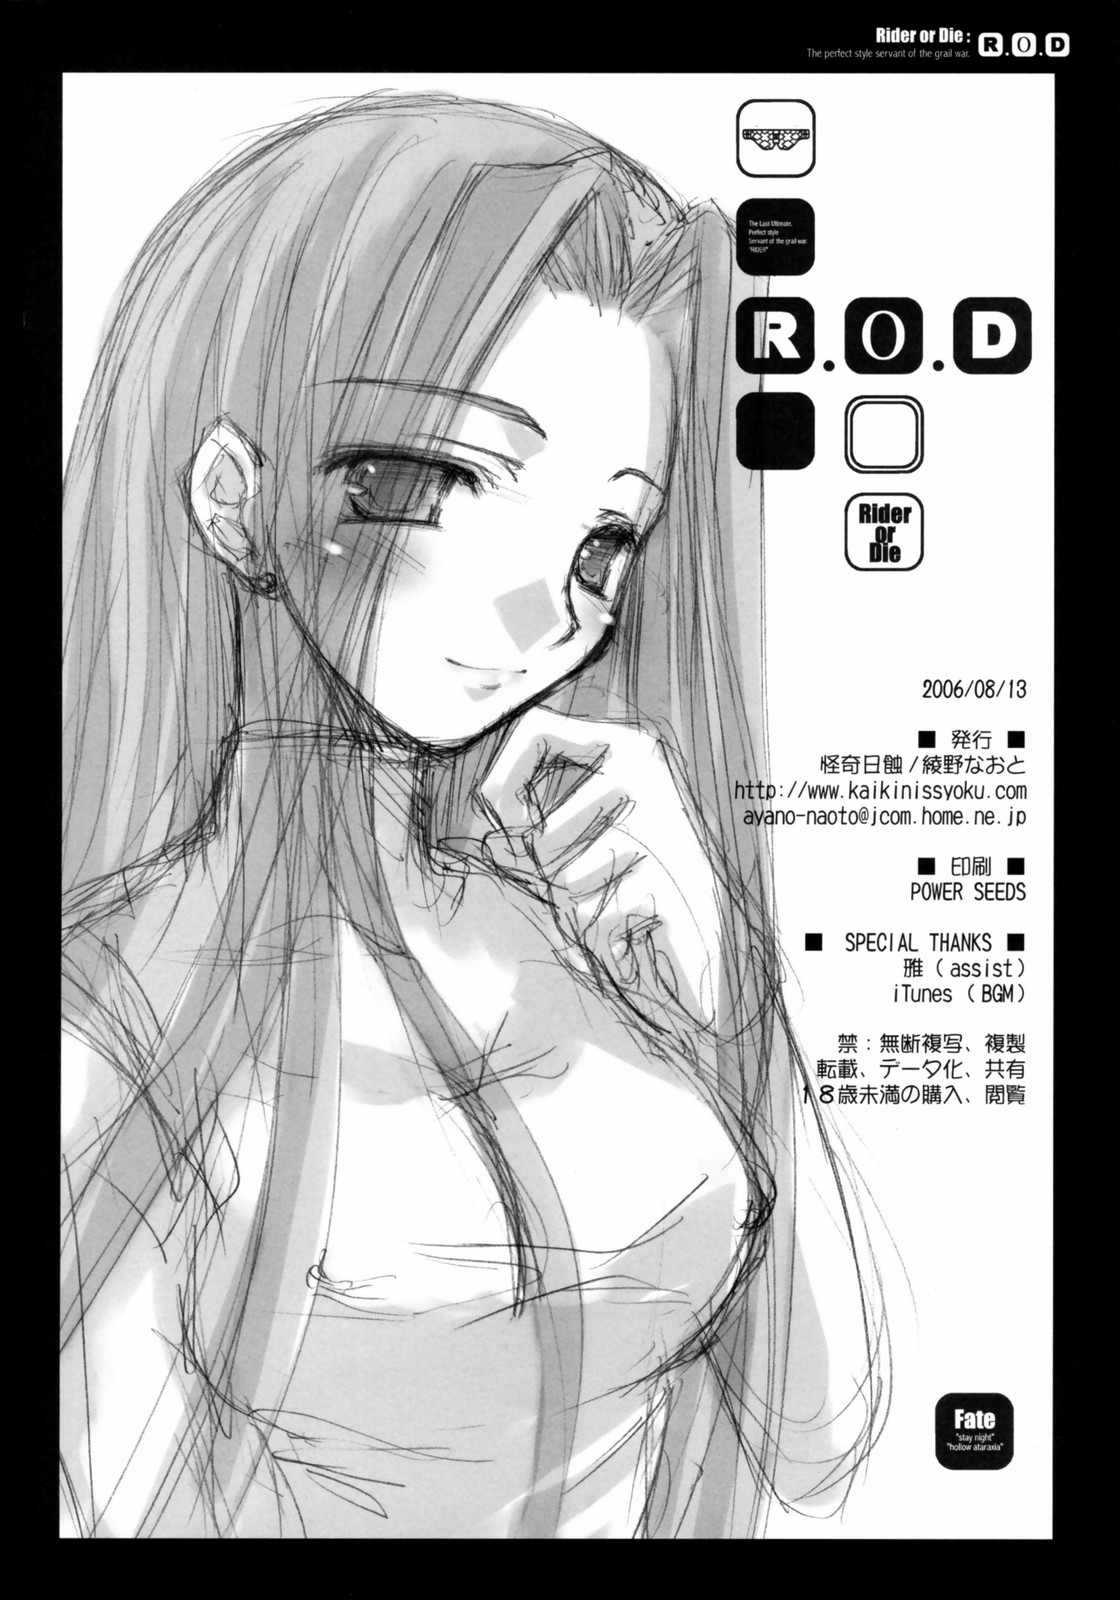 Xem ảnh R.O.D - Rider or Die - Chapter 1 - 1605492297852_0 - Hentai24h.Tv